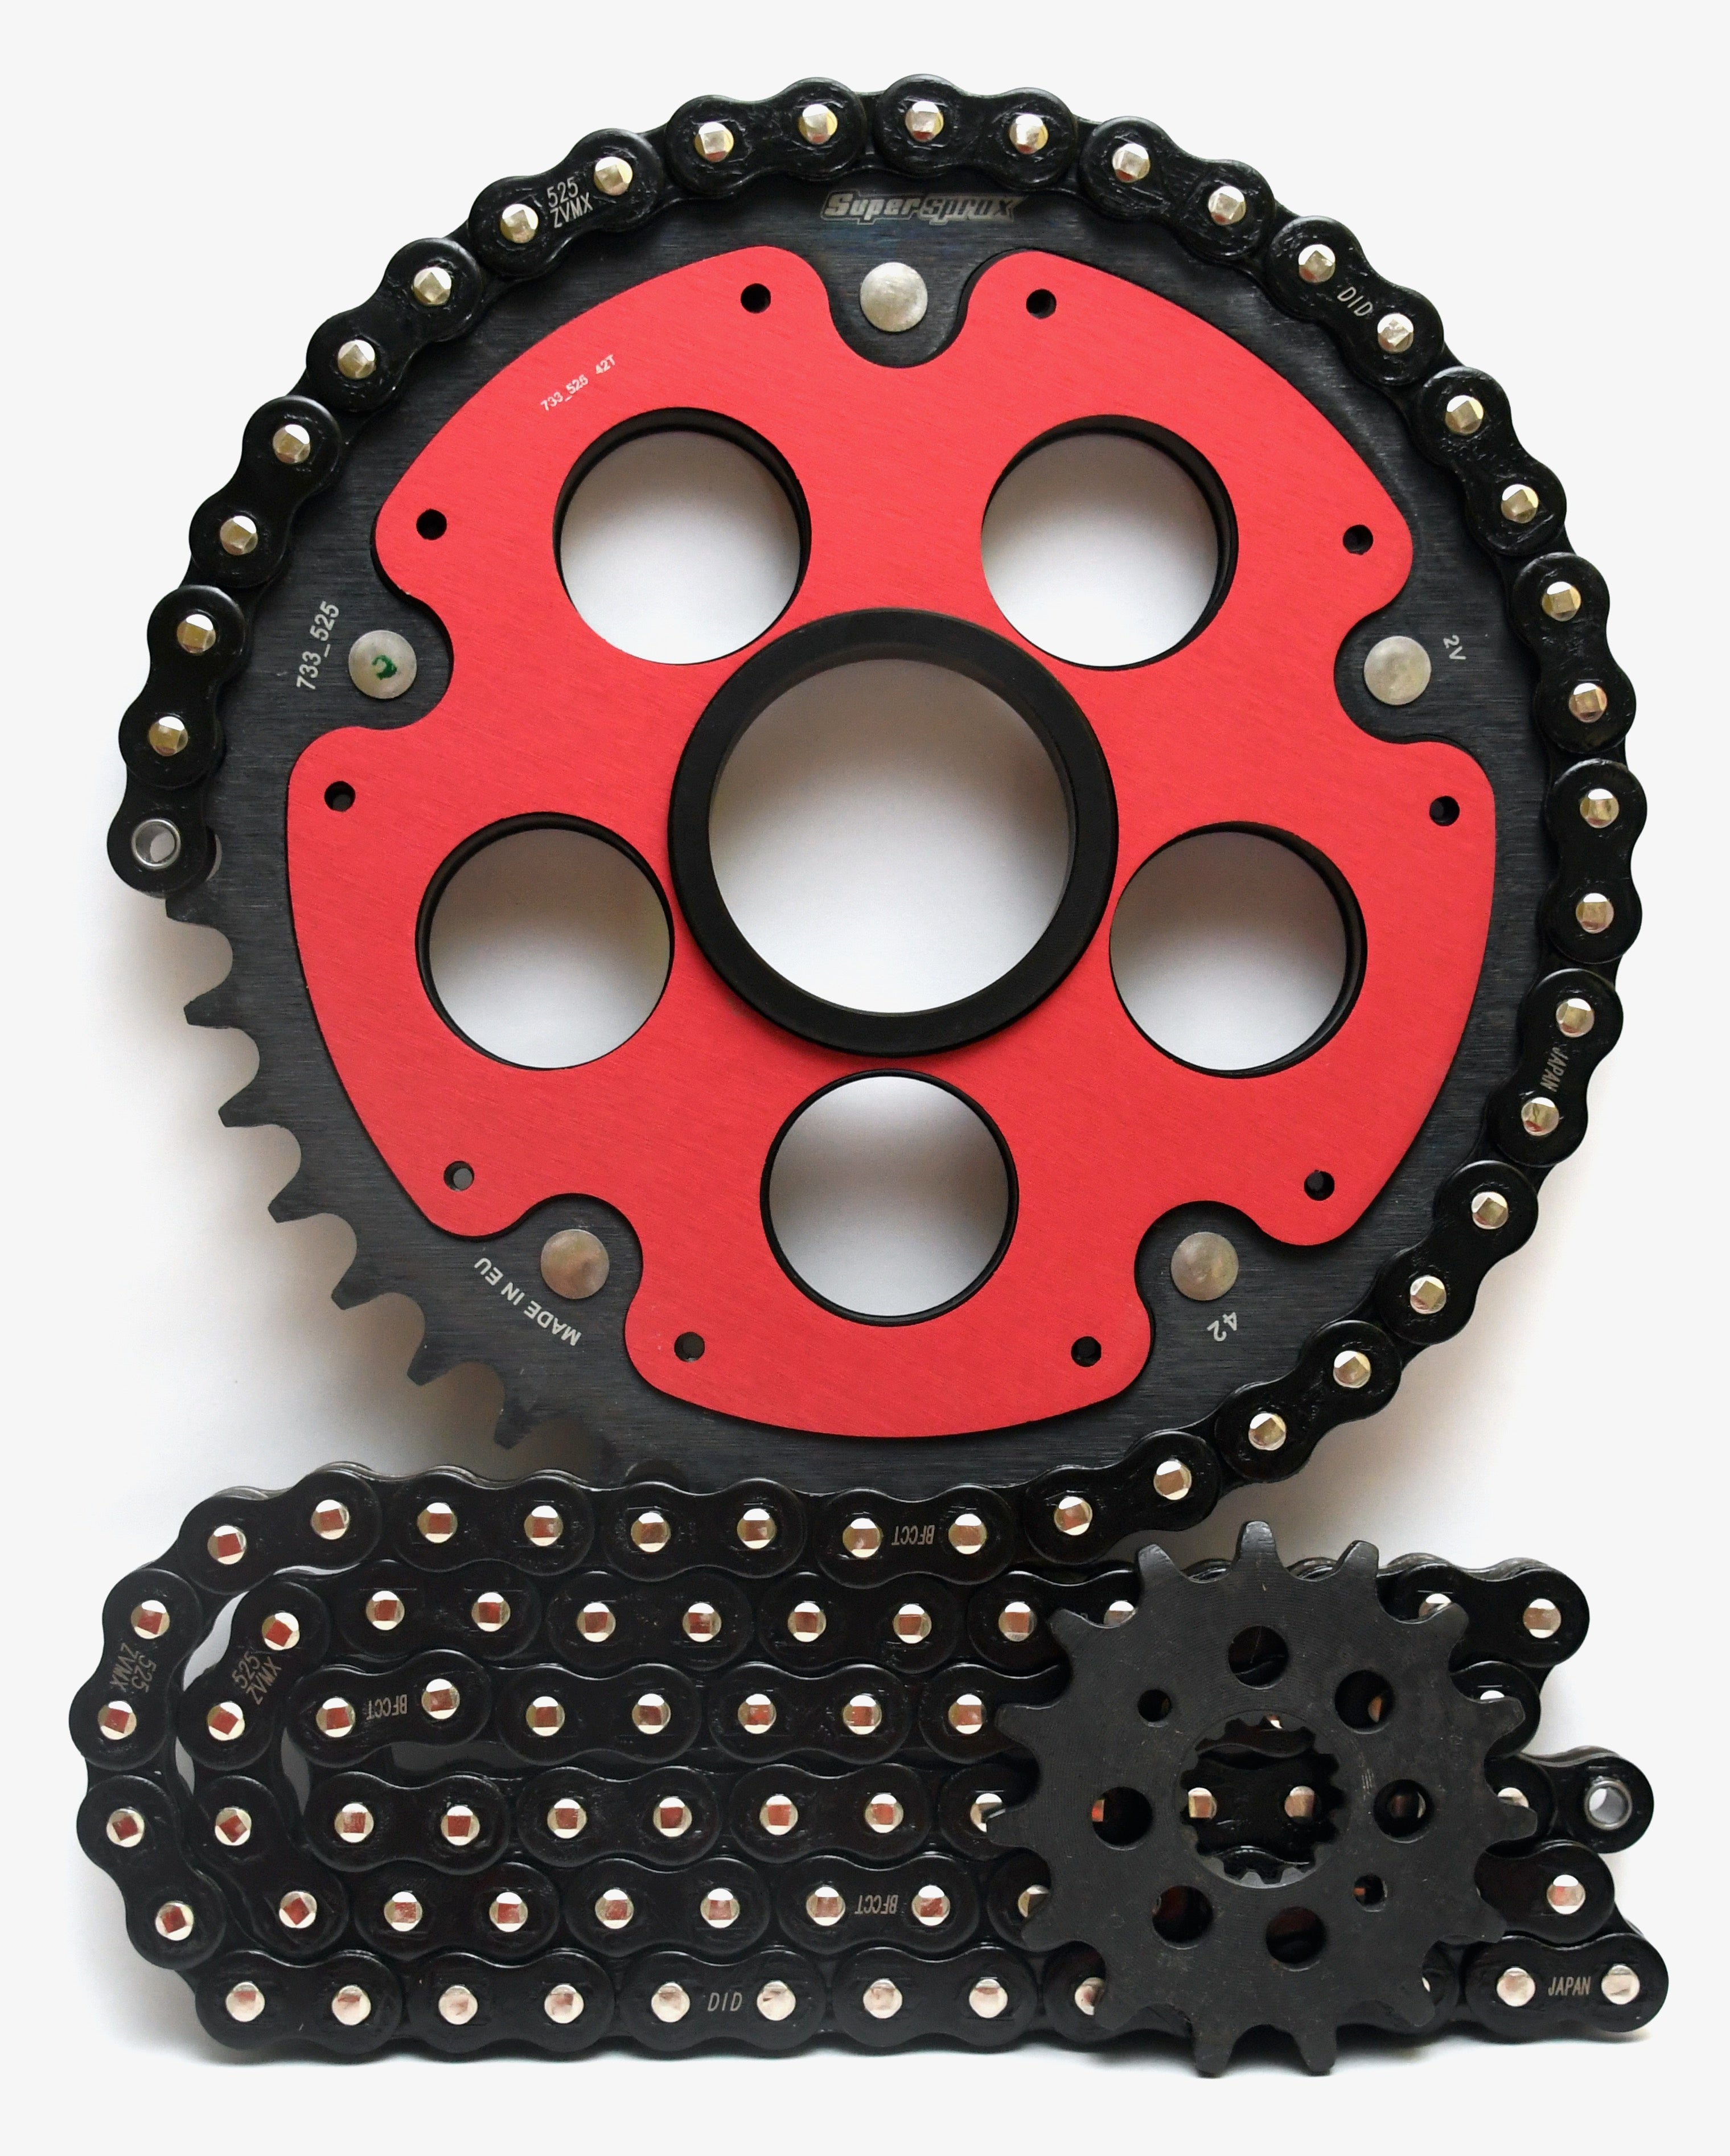 Supersprox Chain & Sprocket Kit for Ducati Hypermotard 939 (Inc SP) 2016-2018 - Standard Gearing